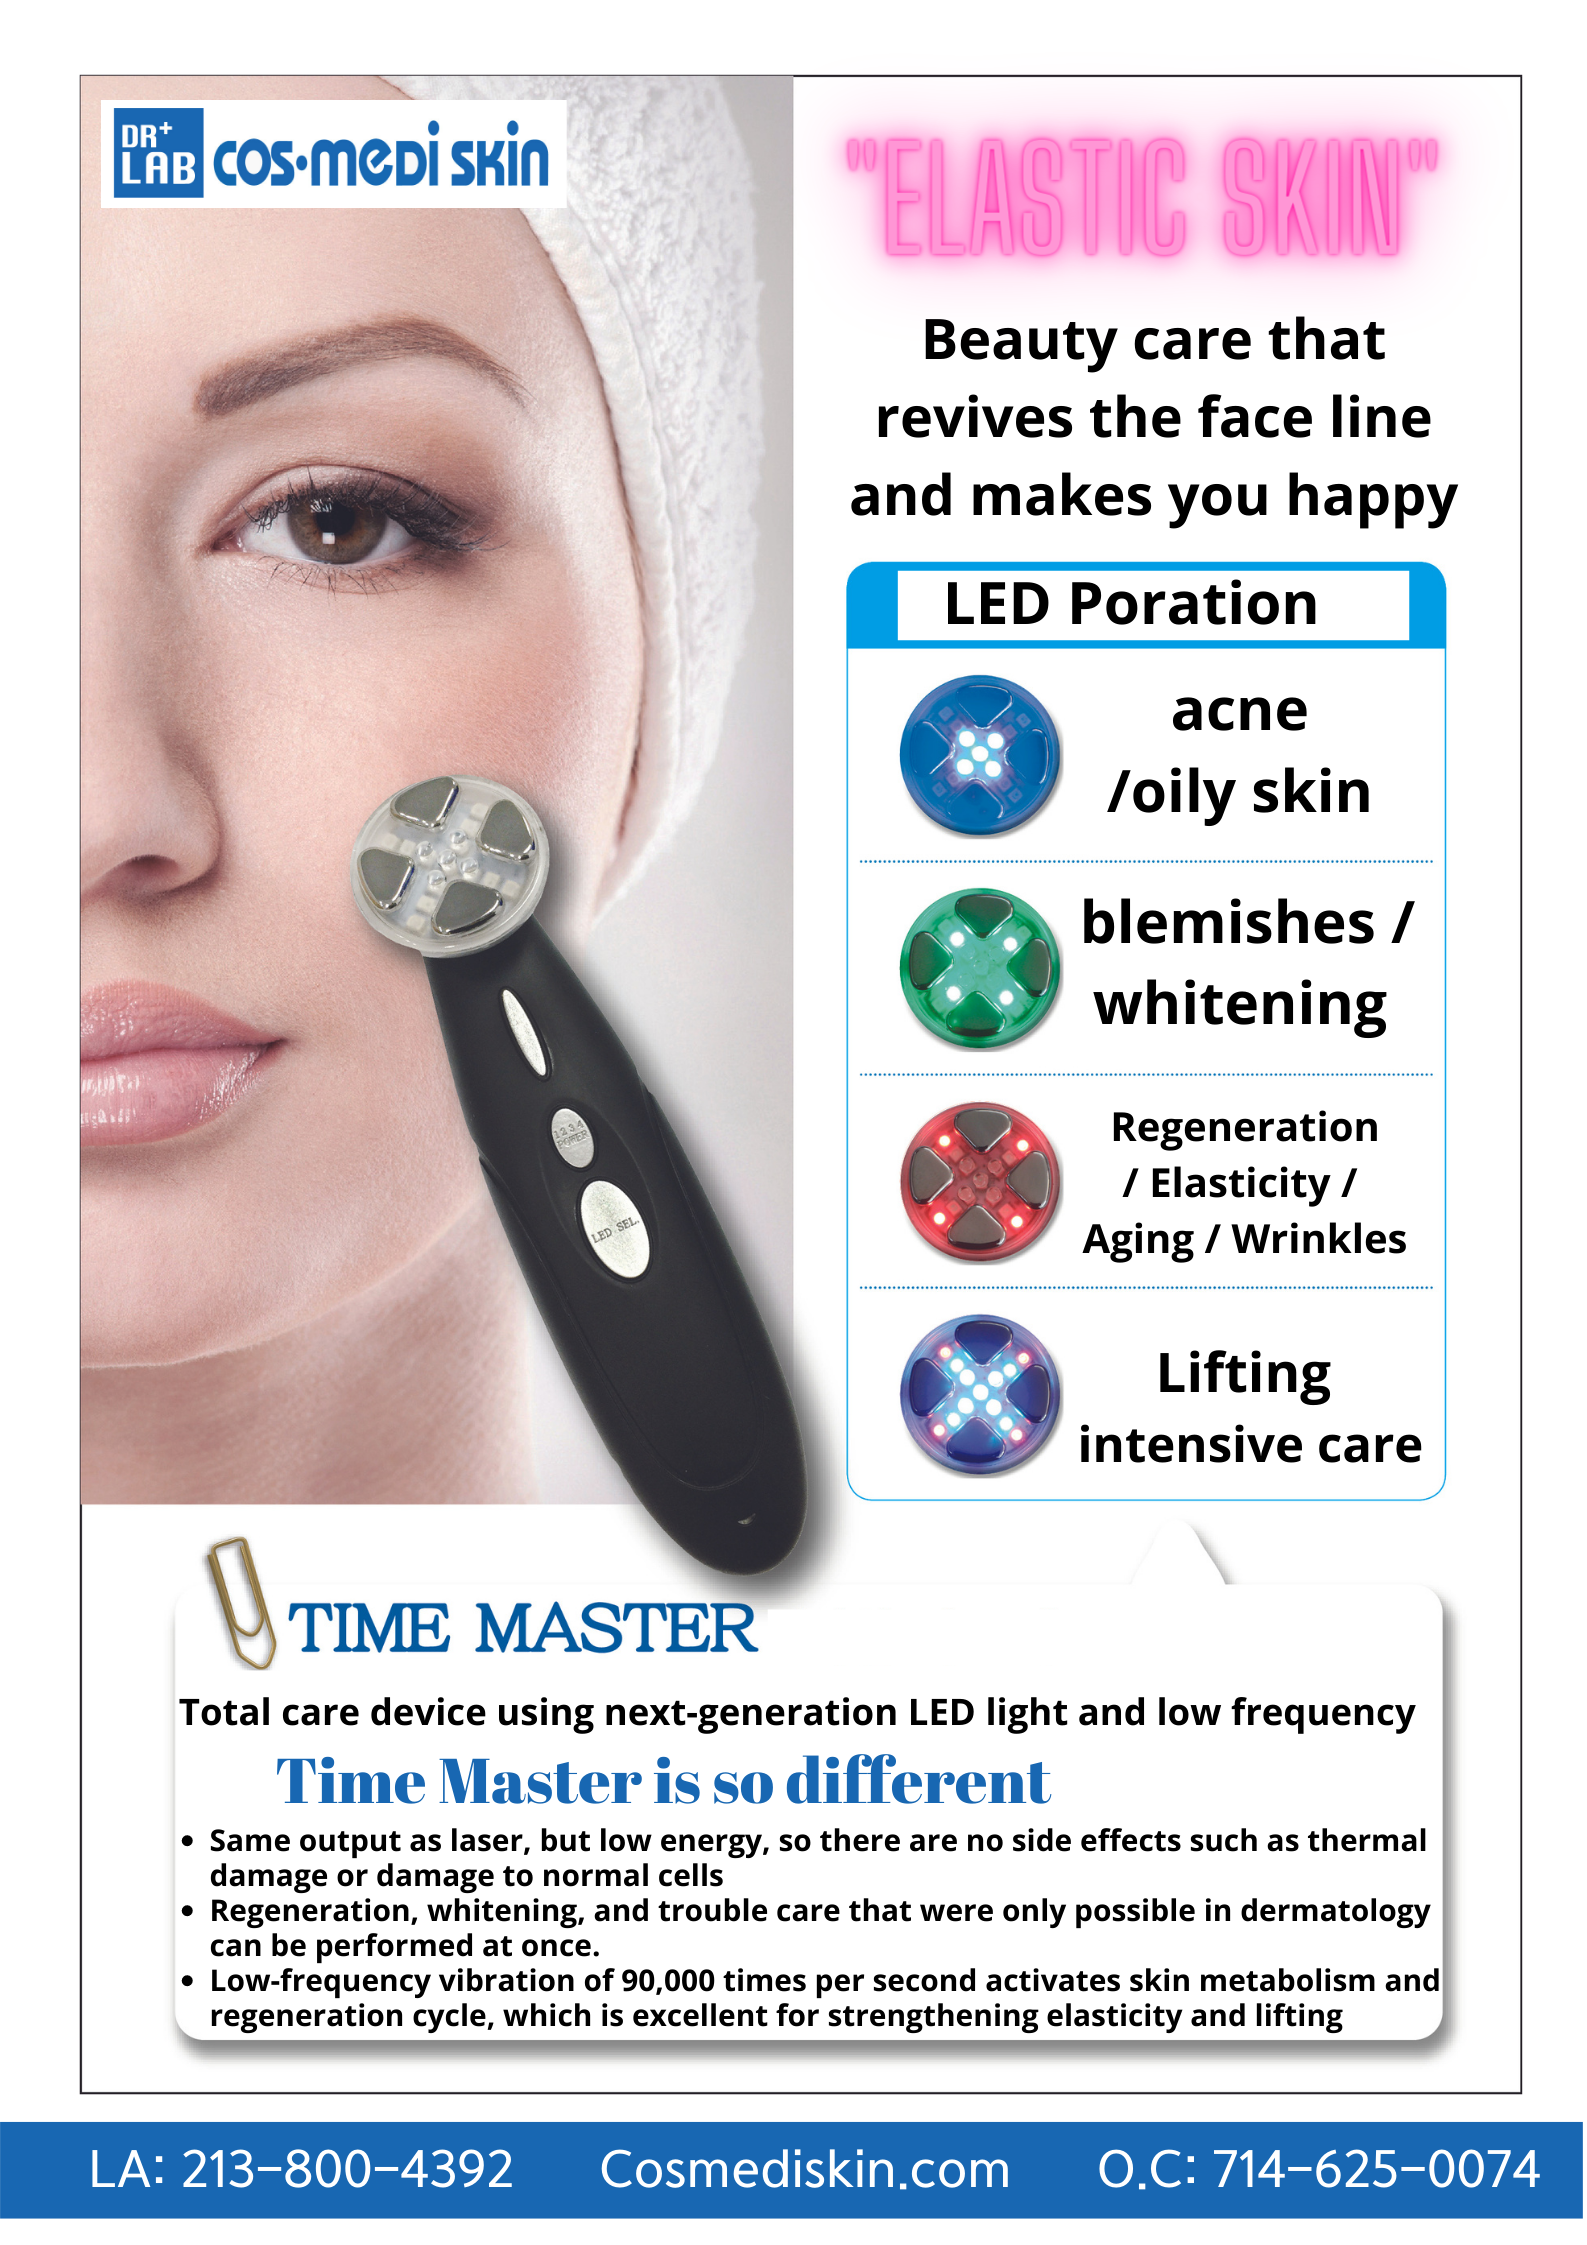 TIME MASTER DEVICE FOR HOME CARE USE